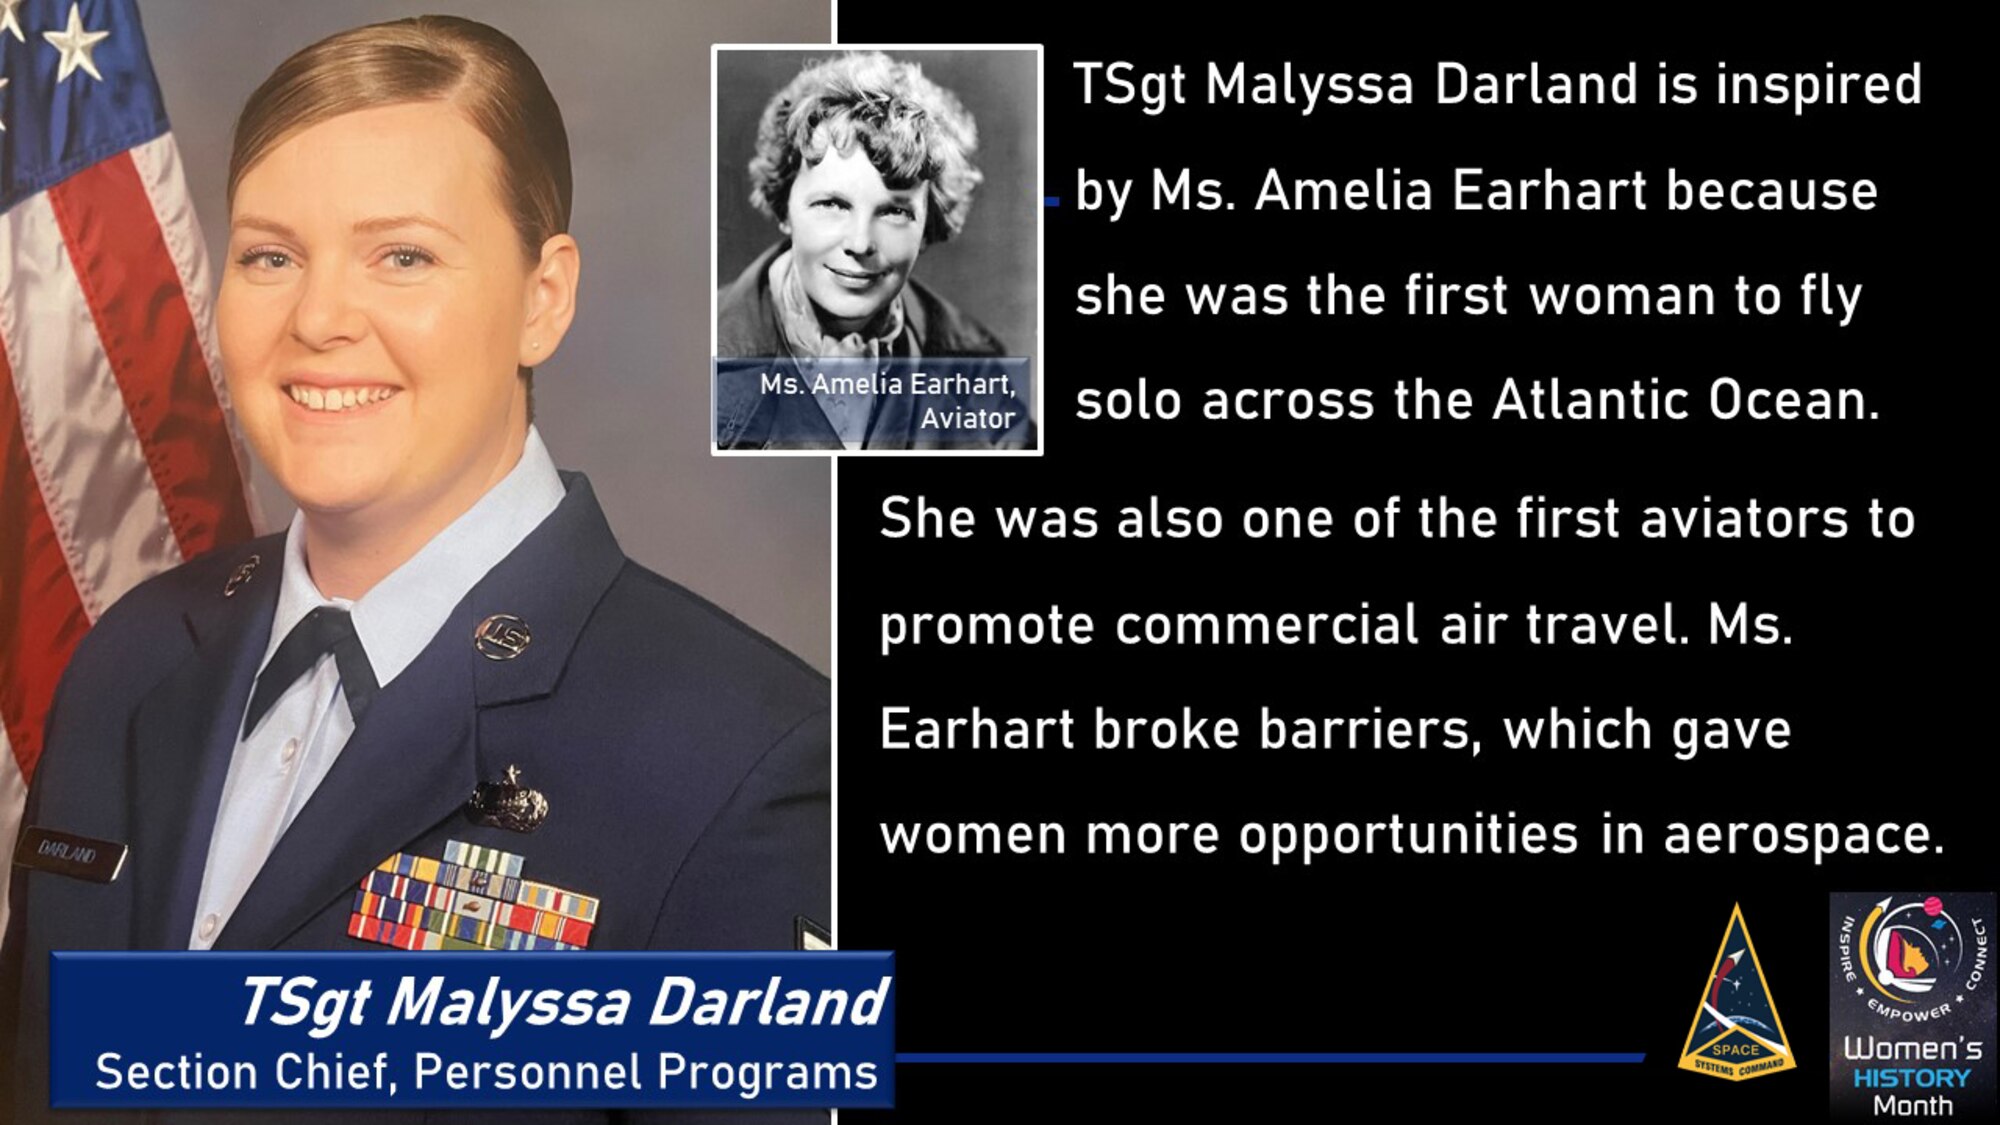 Women’s History Month is celebrated each year in the United States during the month of March. Our highlight this week features TSgt Malyssa Darland! Learn more about who inspires her for #WomensHistoryMonth.